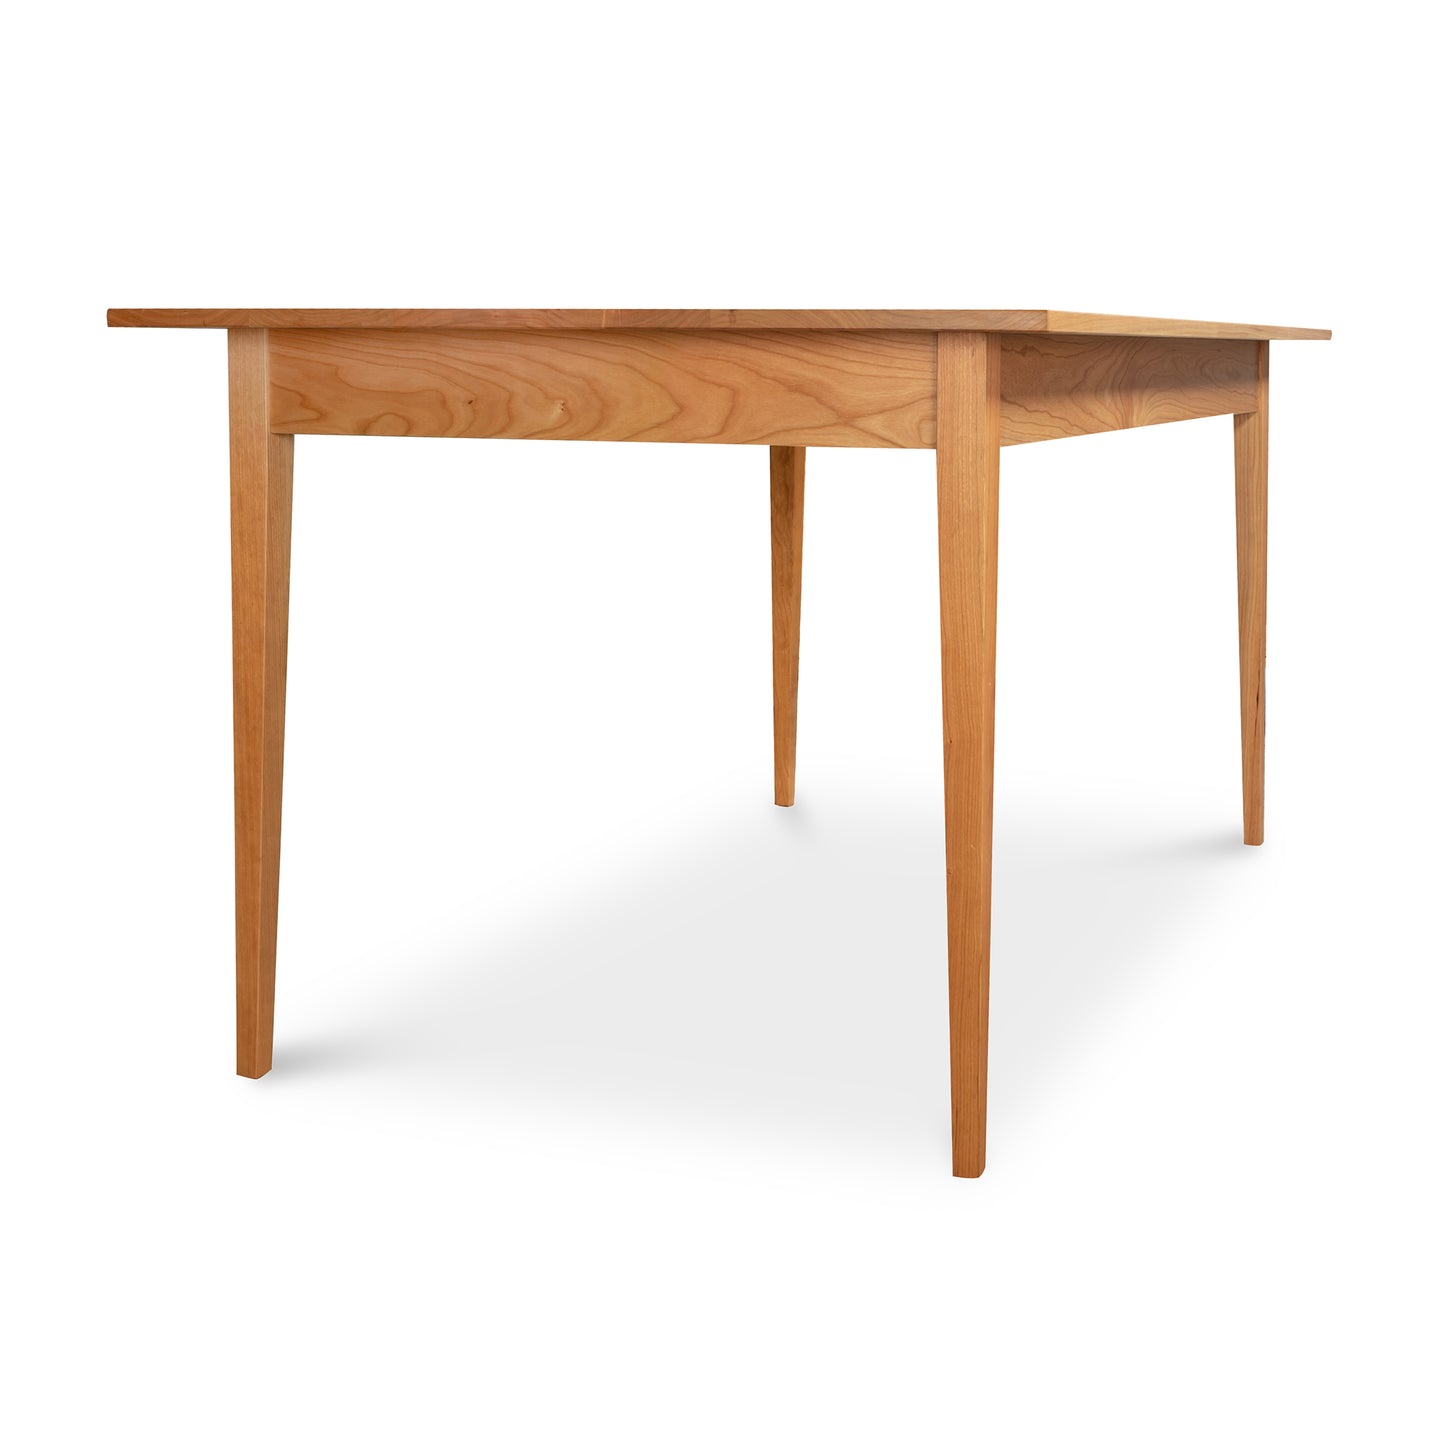 A traditional Vermont Woods Studios Country Shaker Dining Table featuring natural wood grain.